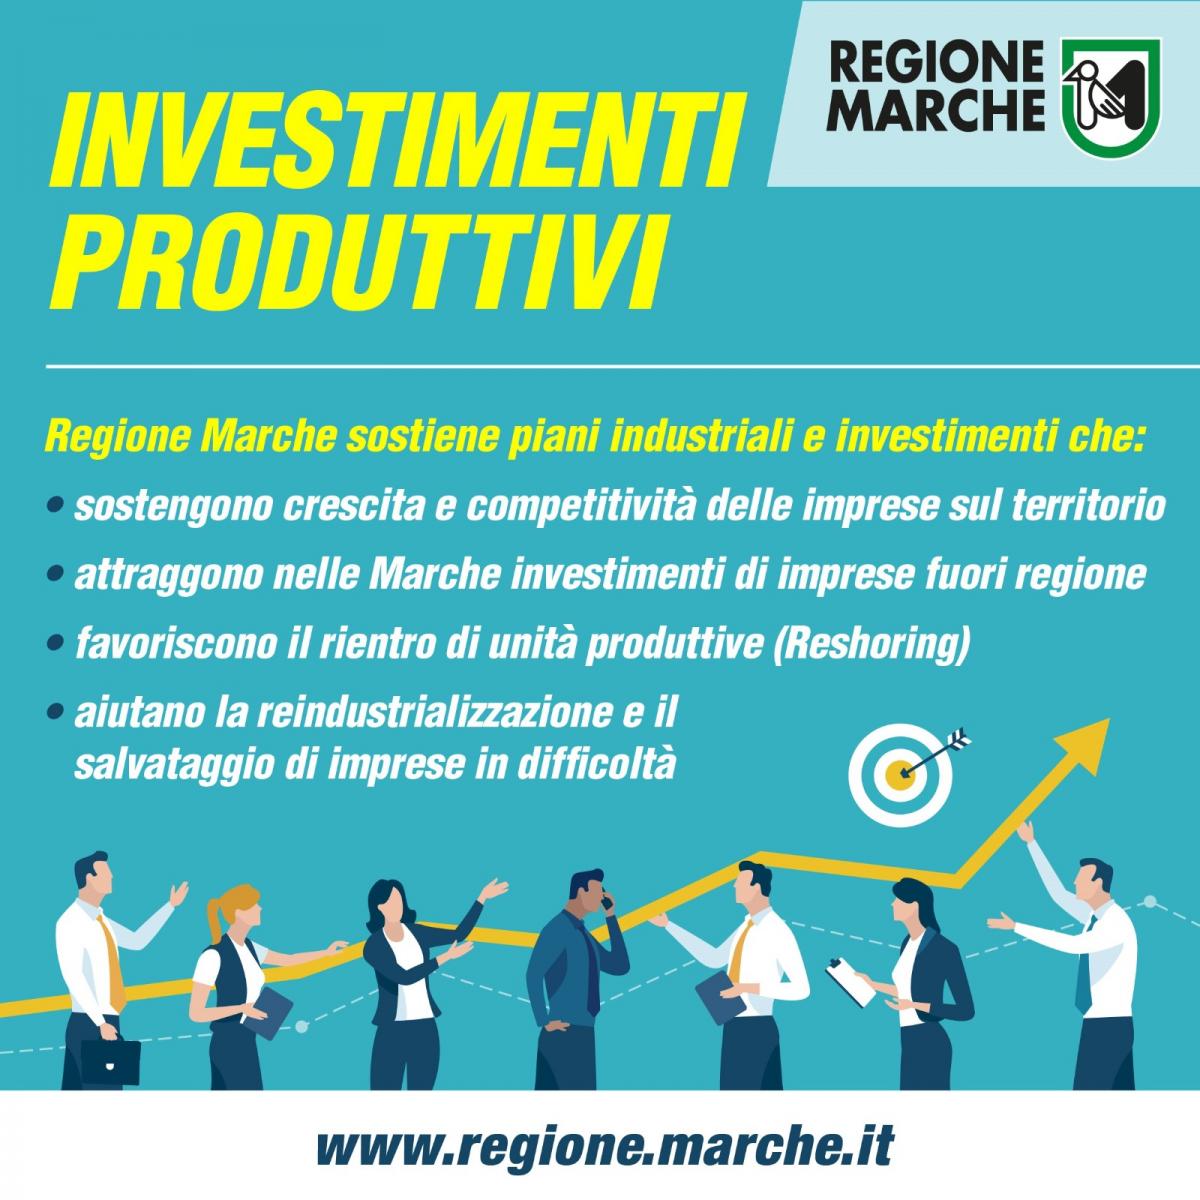 Marche Region: Call for Productive Investments